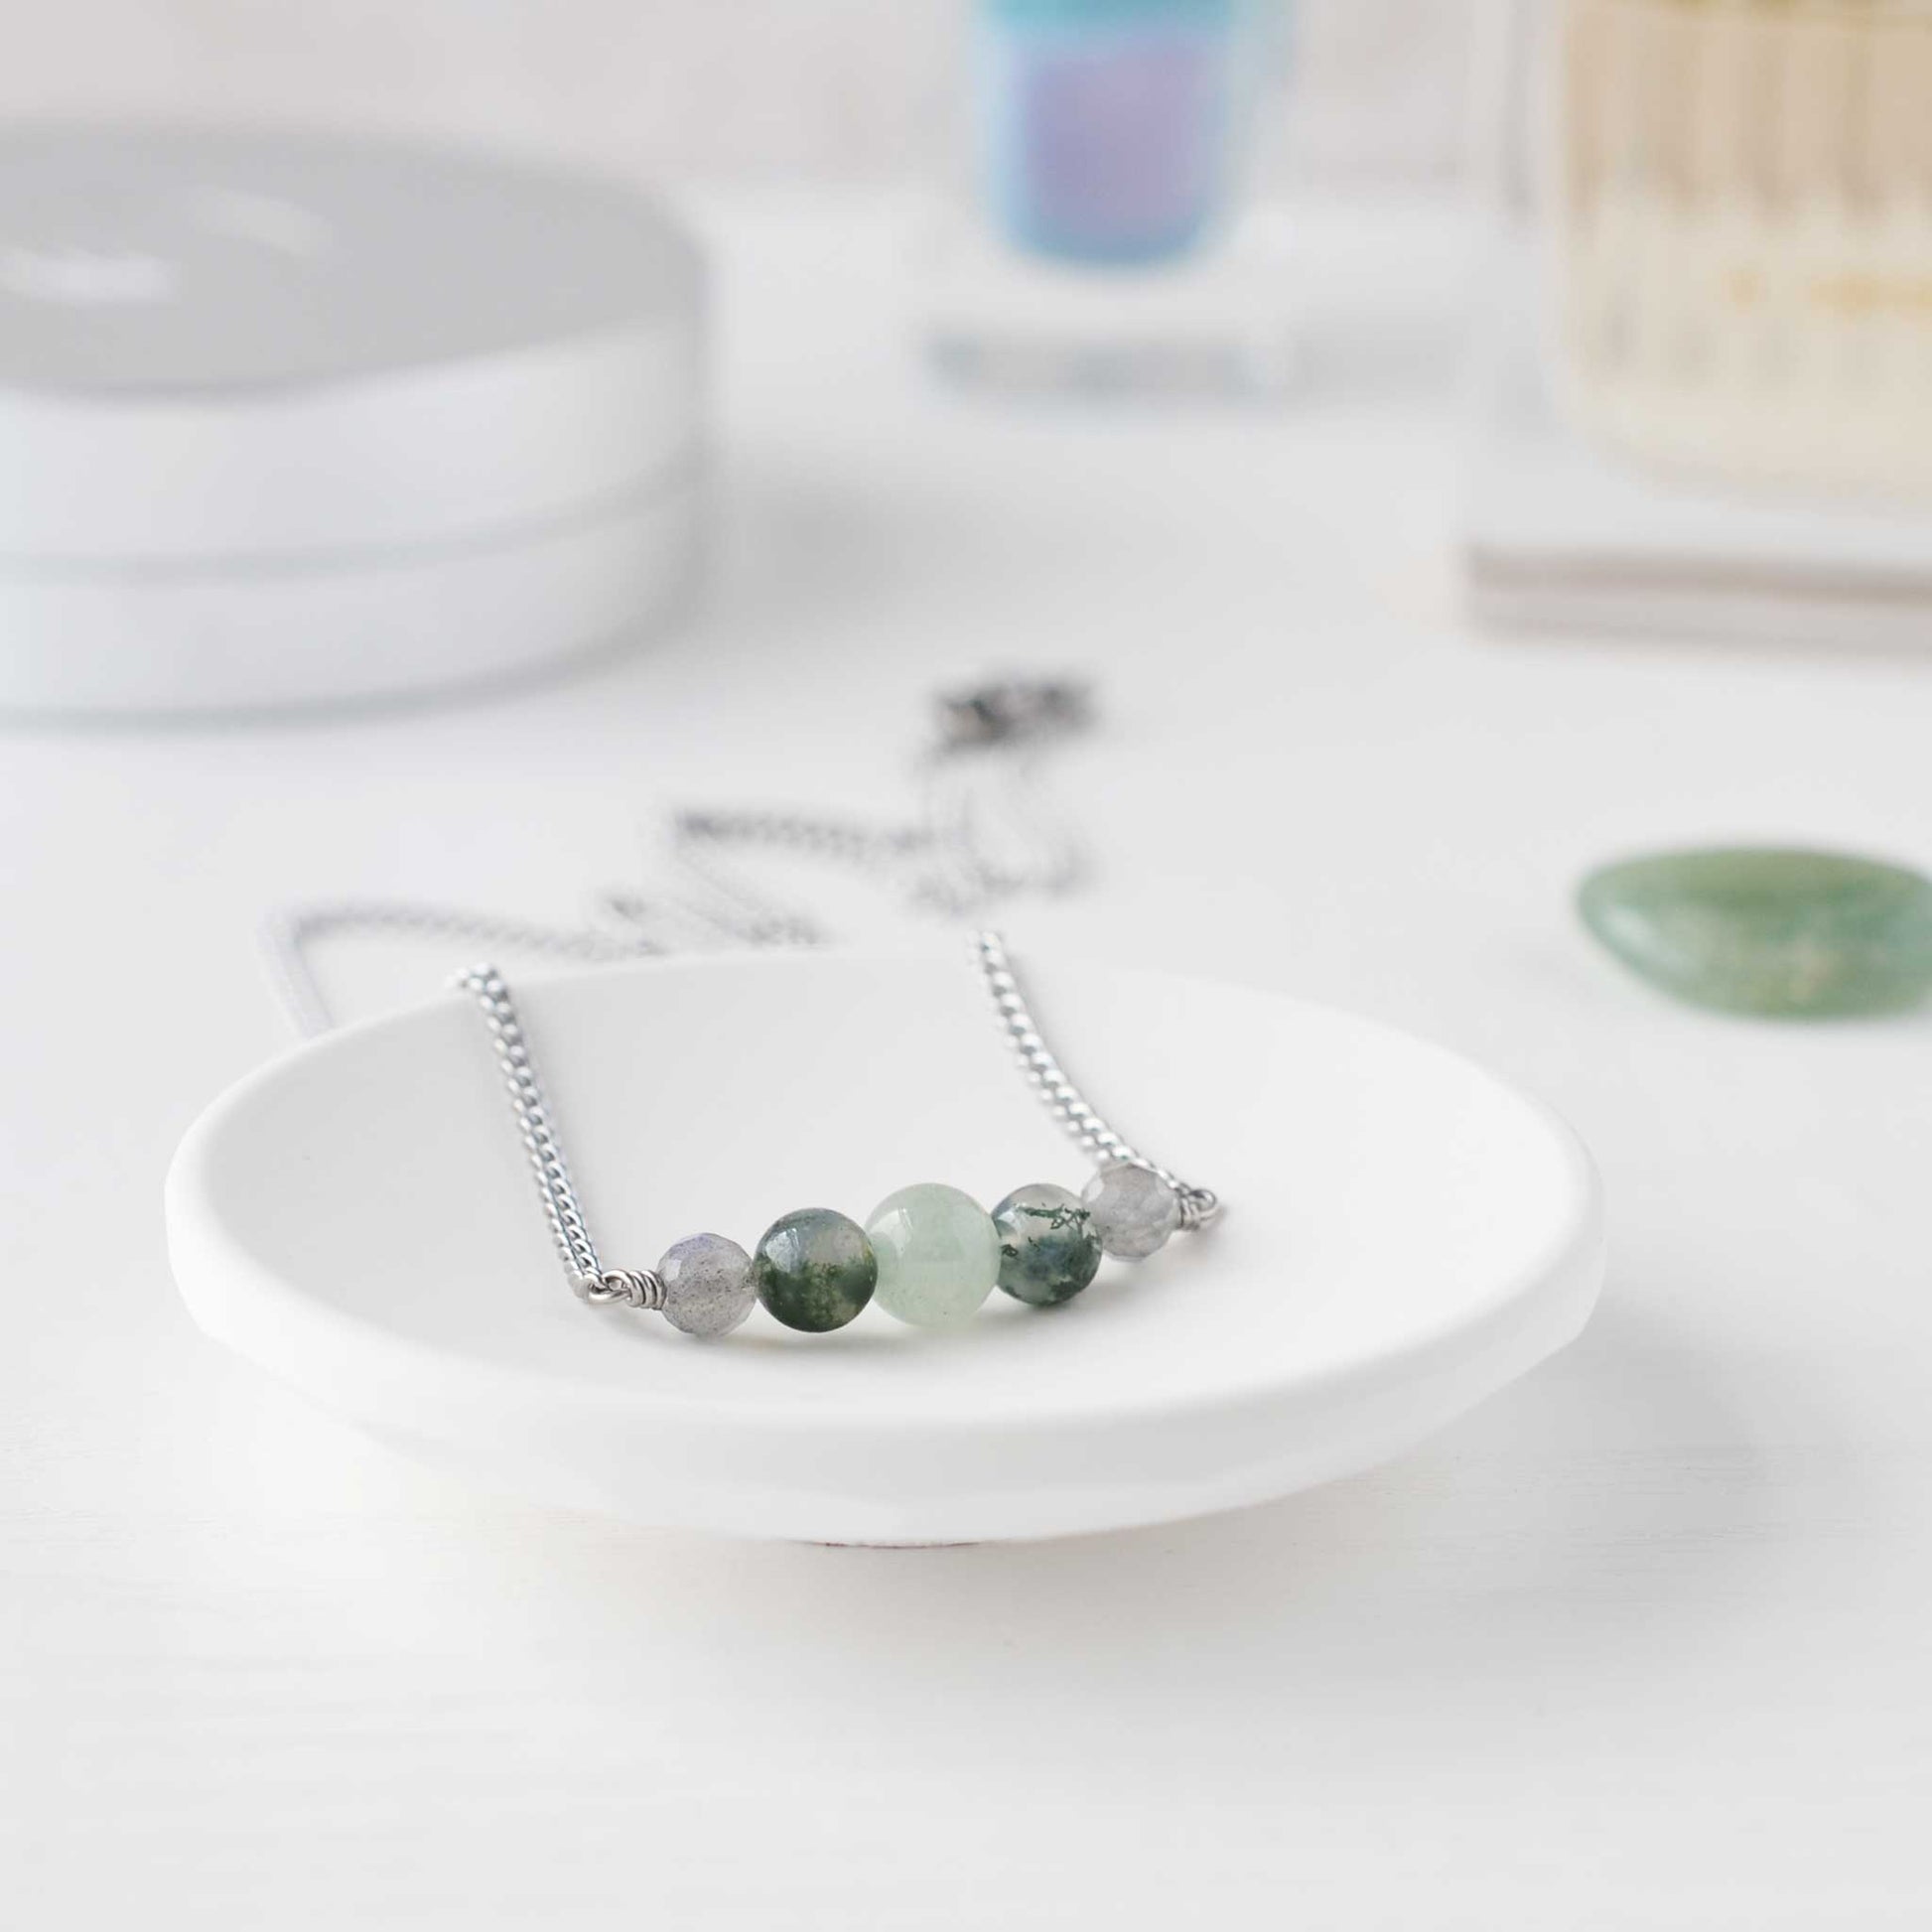 Green gemstone bead necklace in trinket dish on dressing table